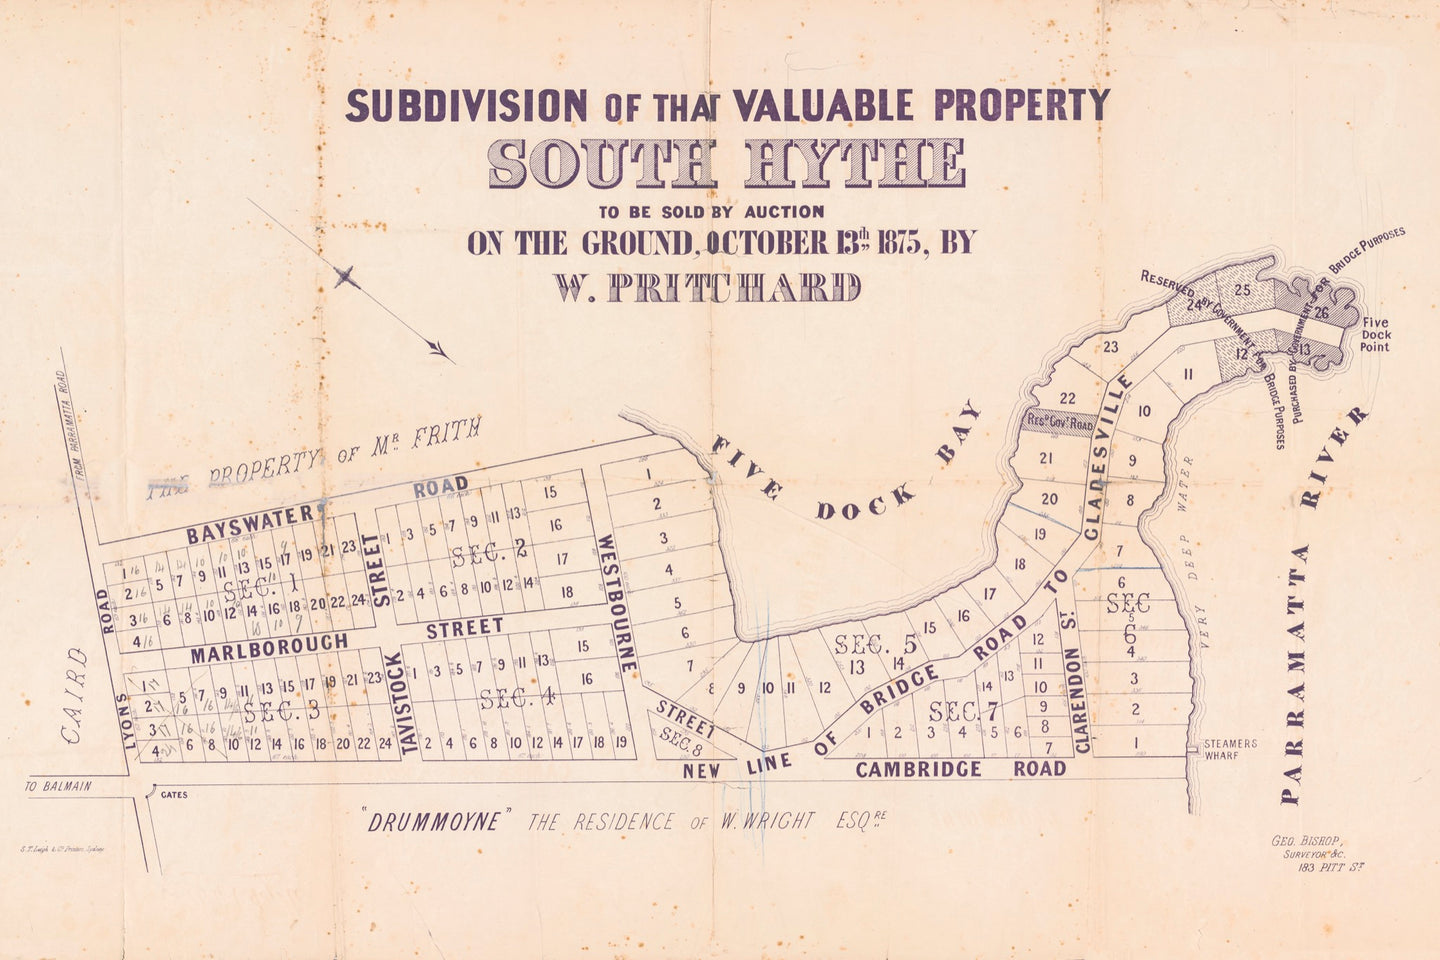 Subdivision of that Valuable Property: South Hythe